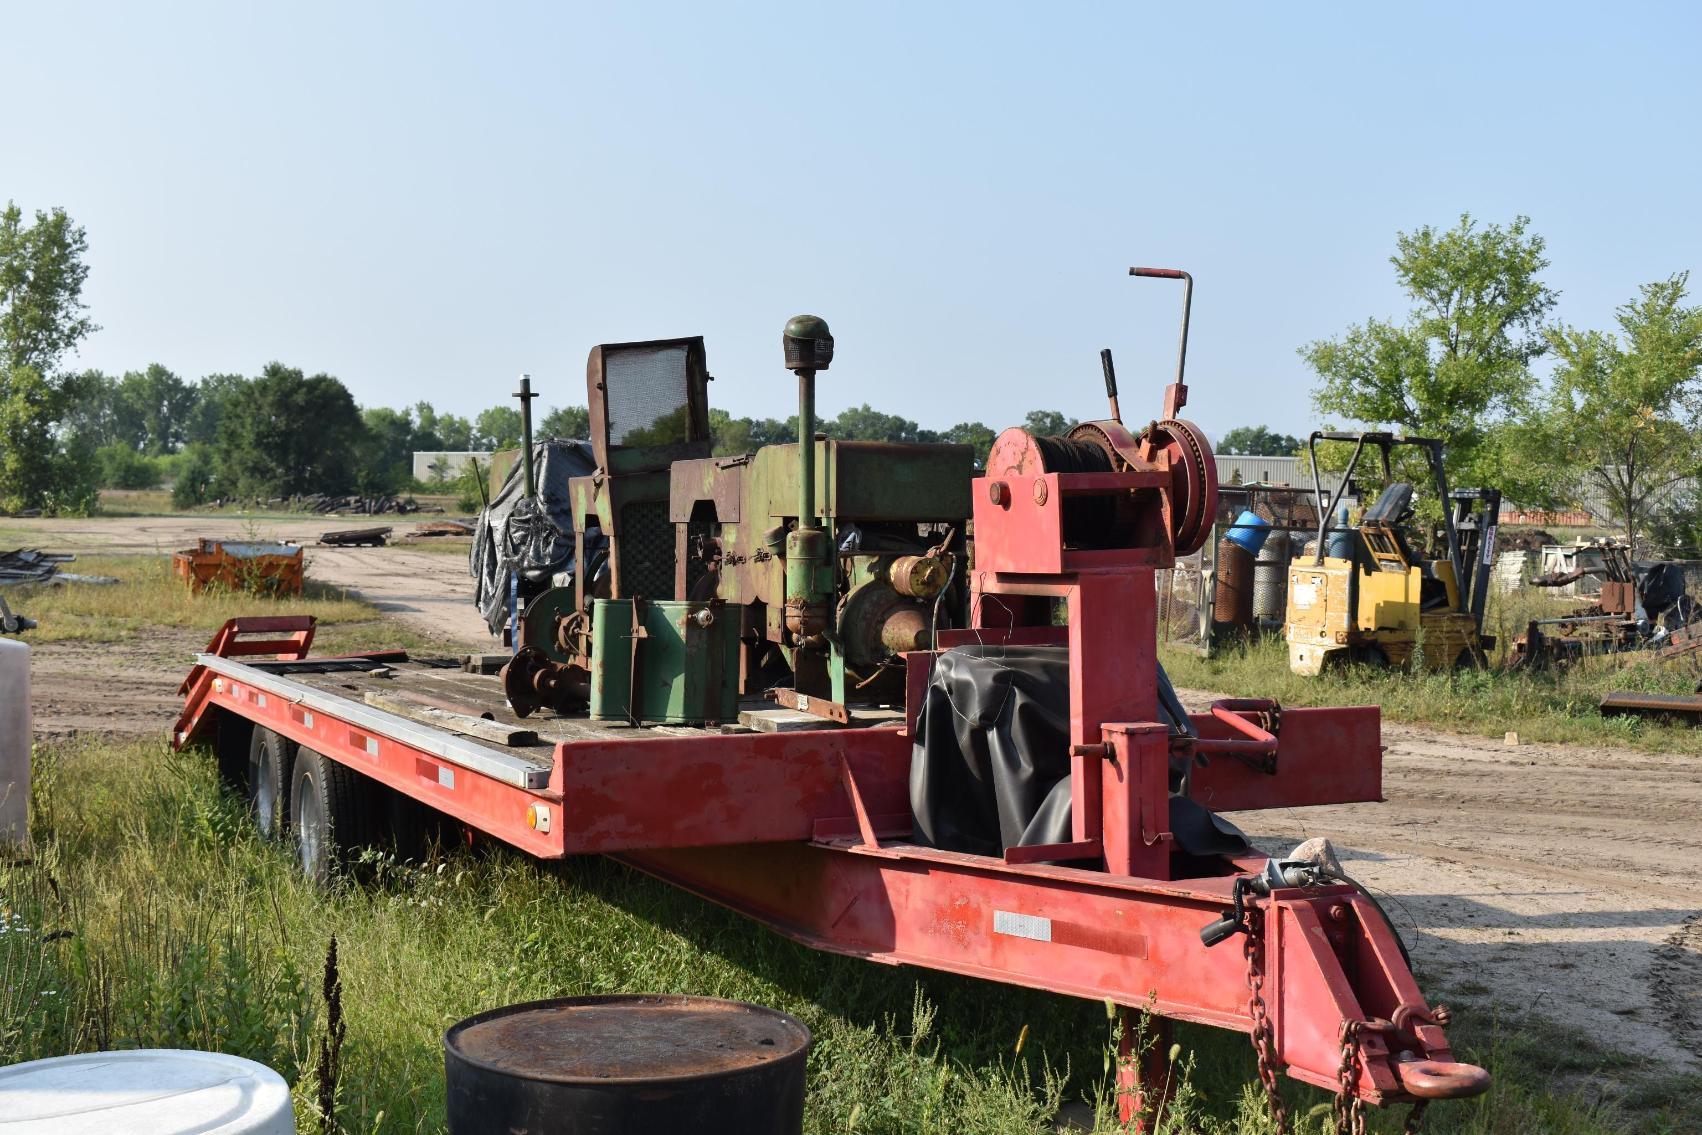 Moving Sale: Construction Equipment, Trailers & Vehicles